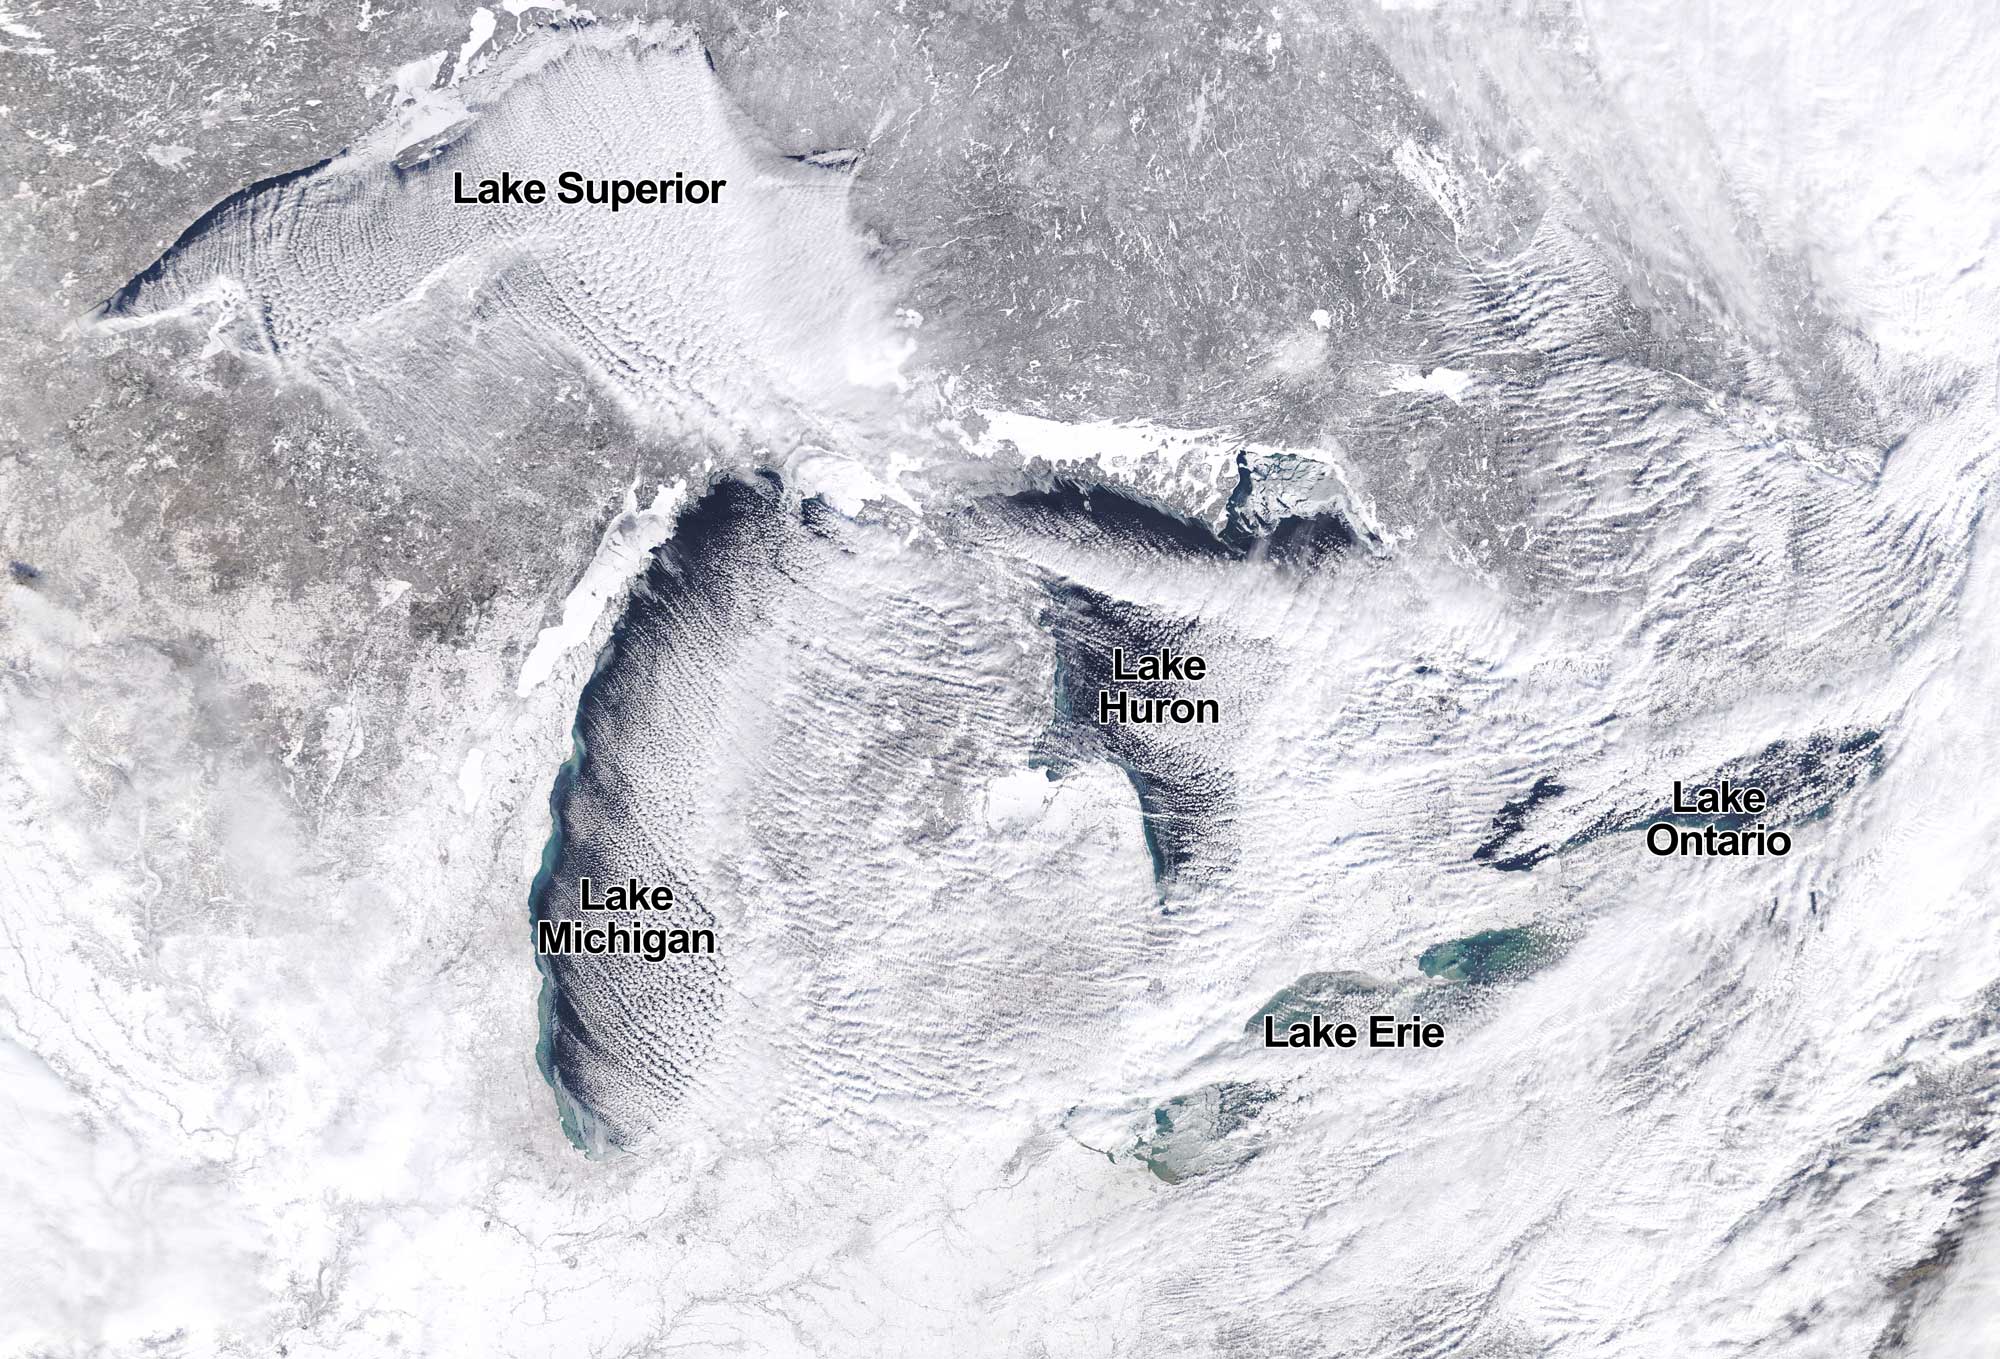 Satellite photo fo the Great Lakes region during the winter with all five lakes labeled. The photo shows that the land is dusted by white snow. Clouds stream from above Lake Superior and Lake Michigan in curved parallel rows traveling to the southeast. These clouds carry lake-effect snow.